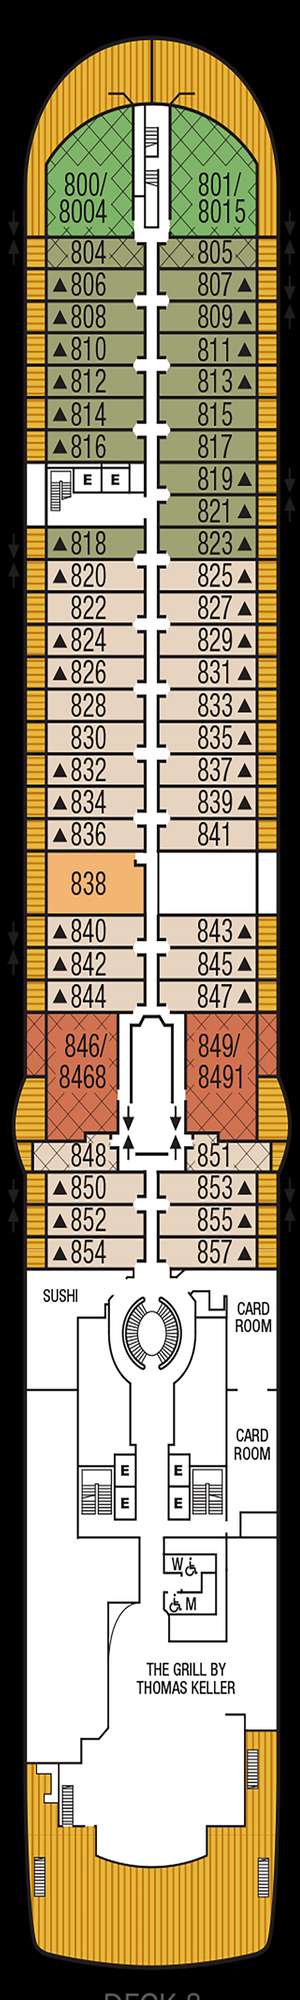 Deck plan for Seabourn Encore